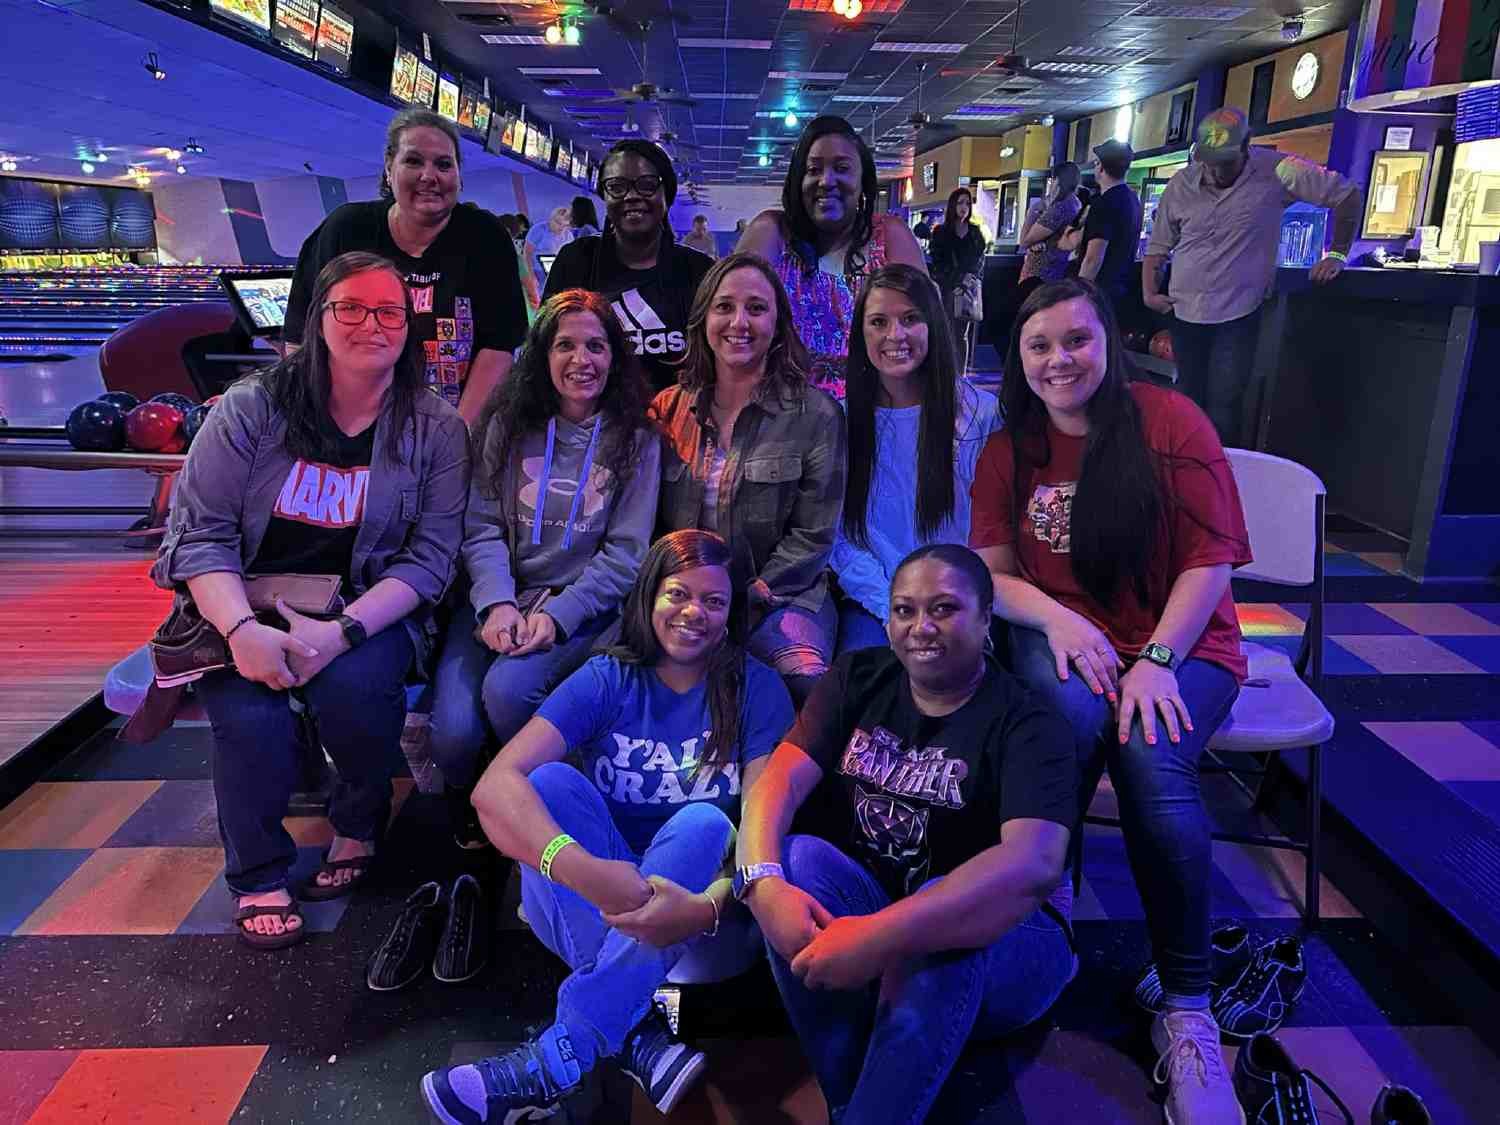 Listerhill Contact Center employees meet at the local bowling alley to engage in team building fun!